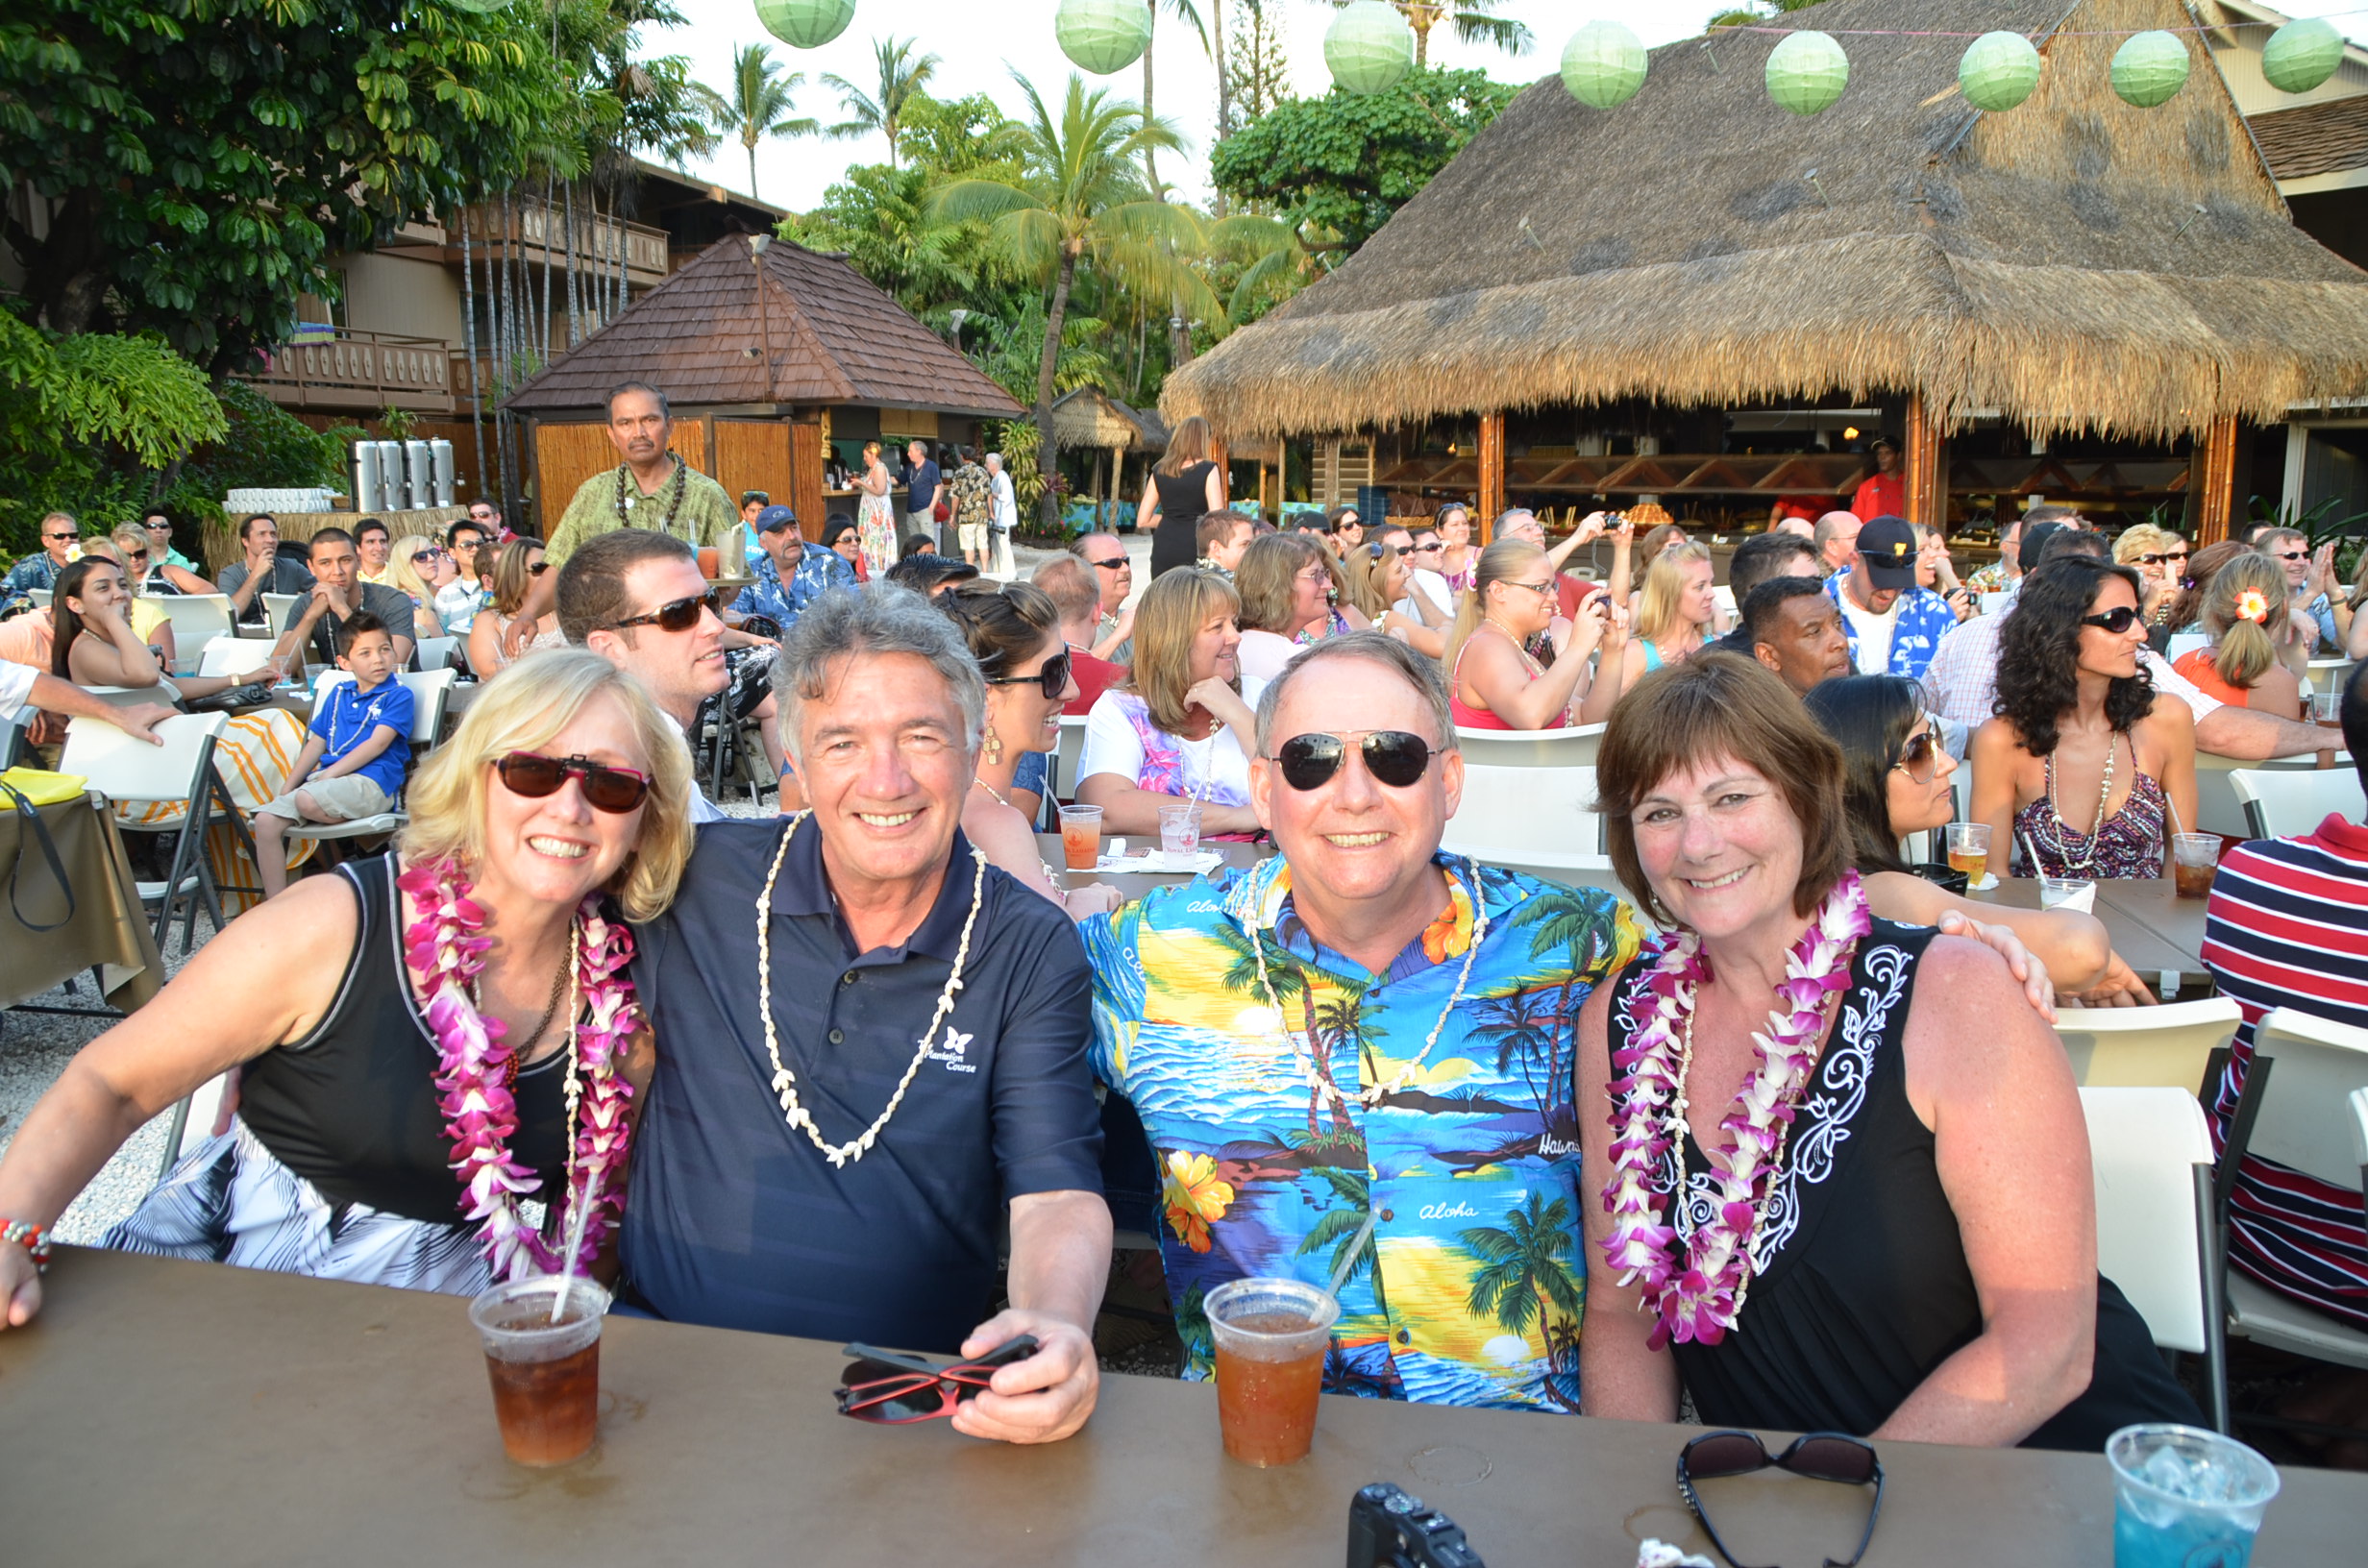 At the Luau